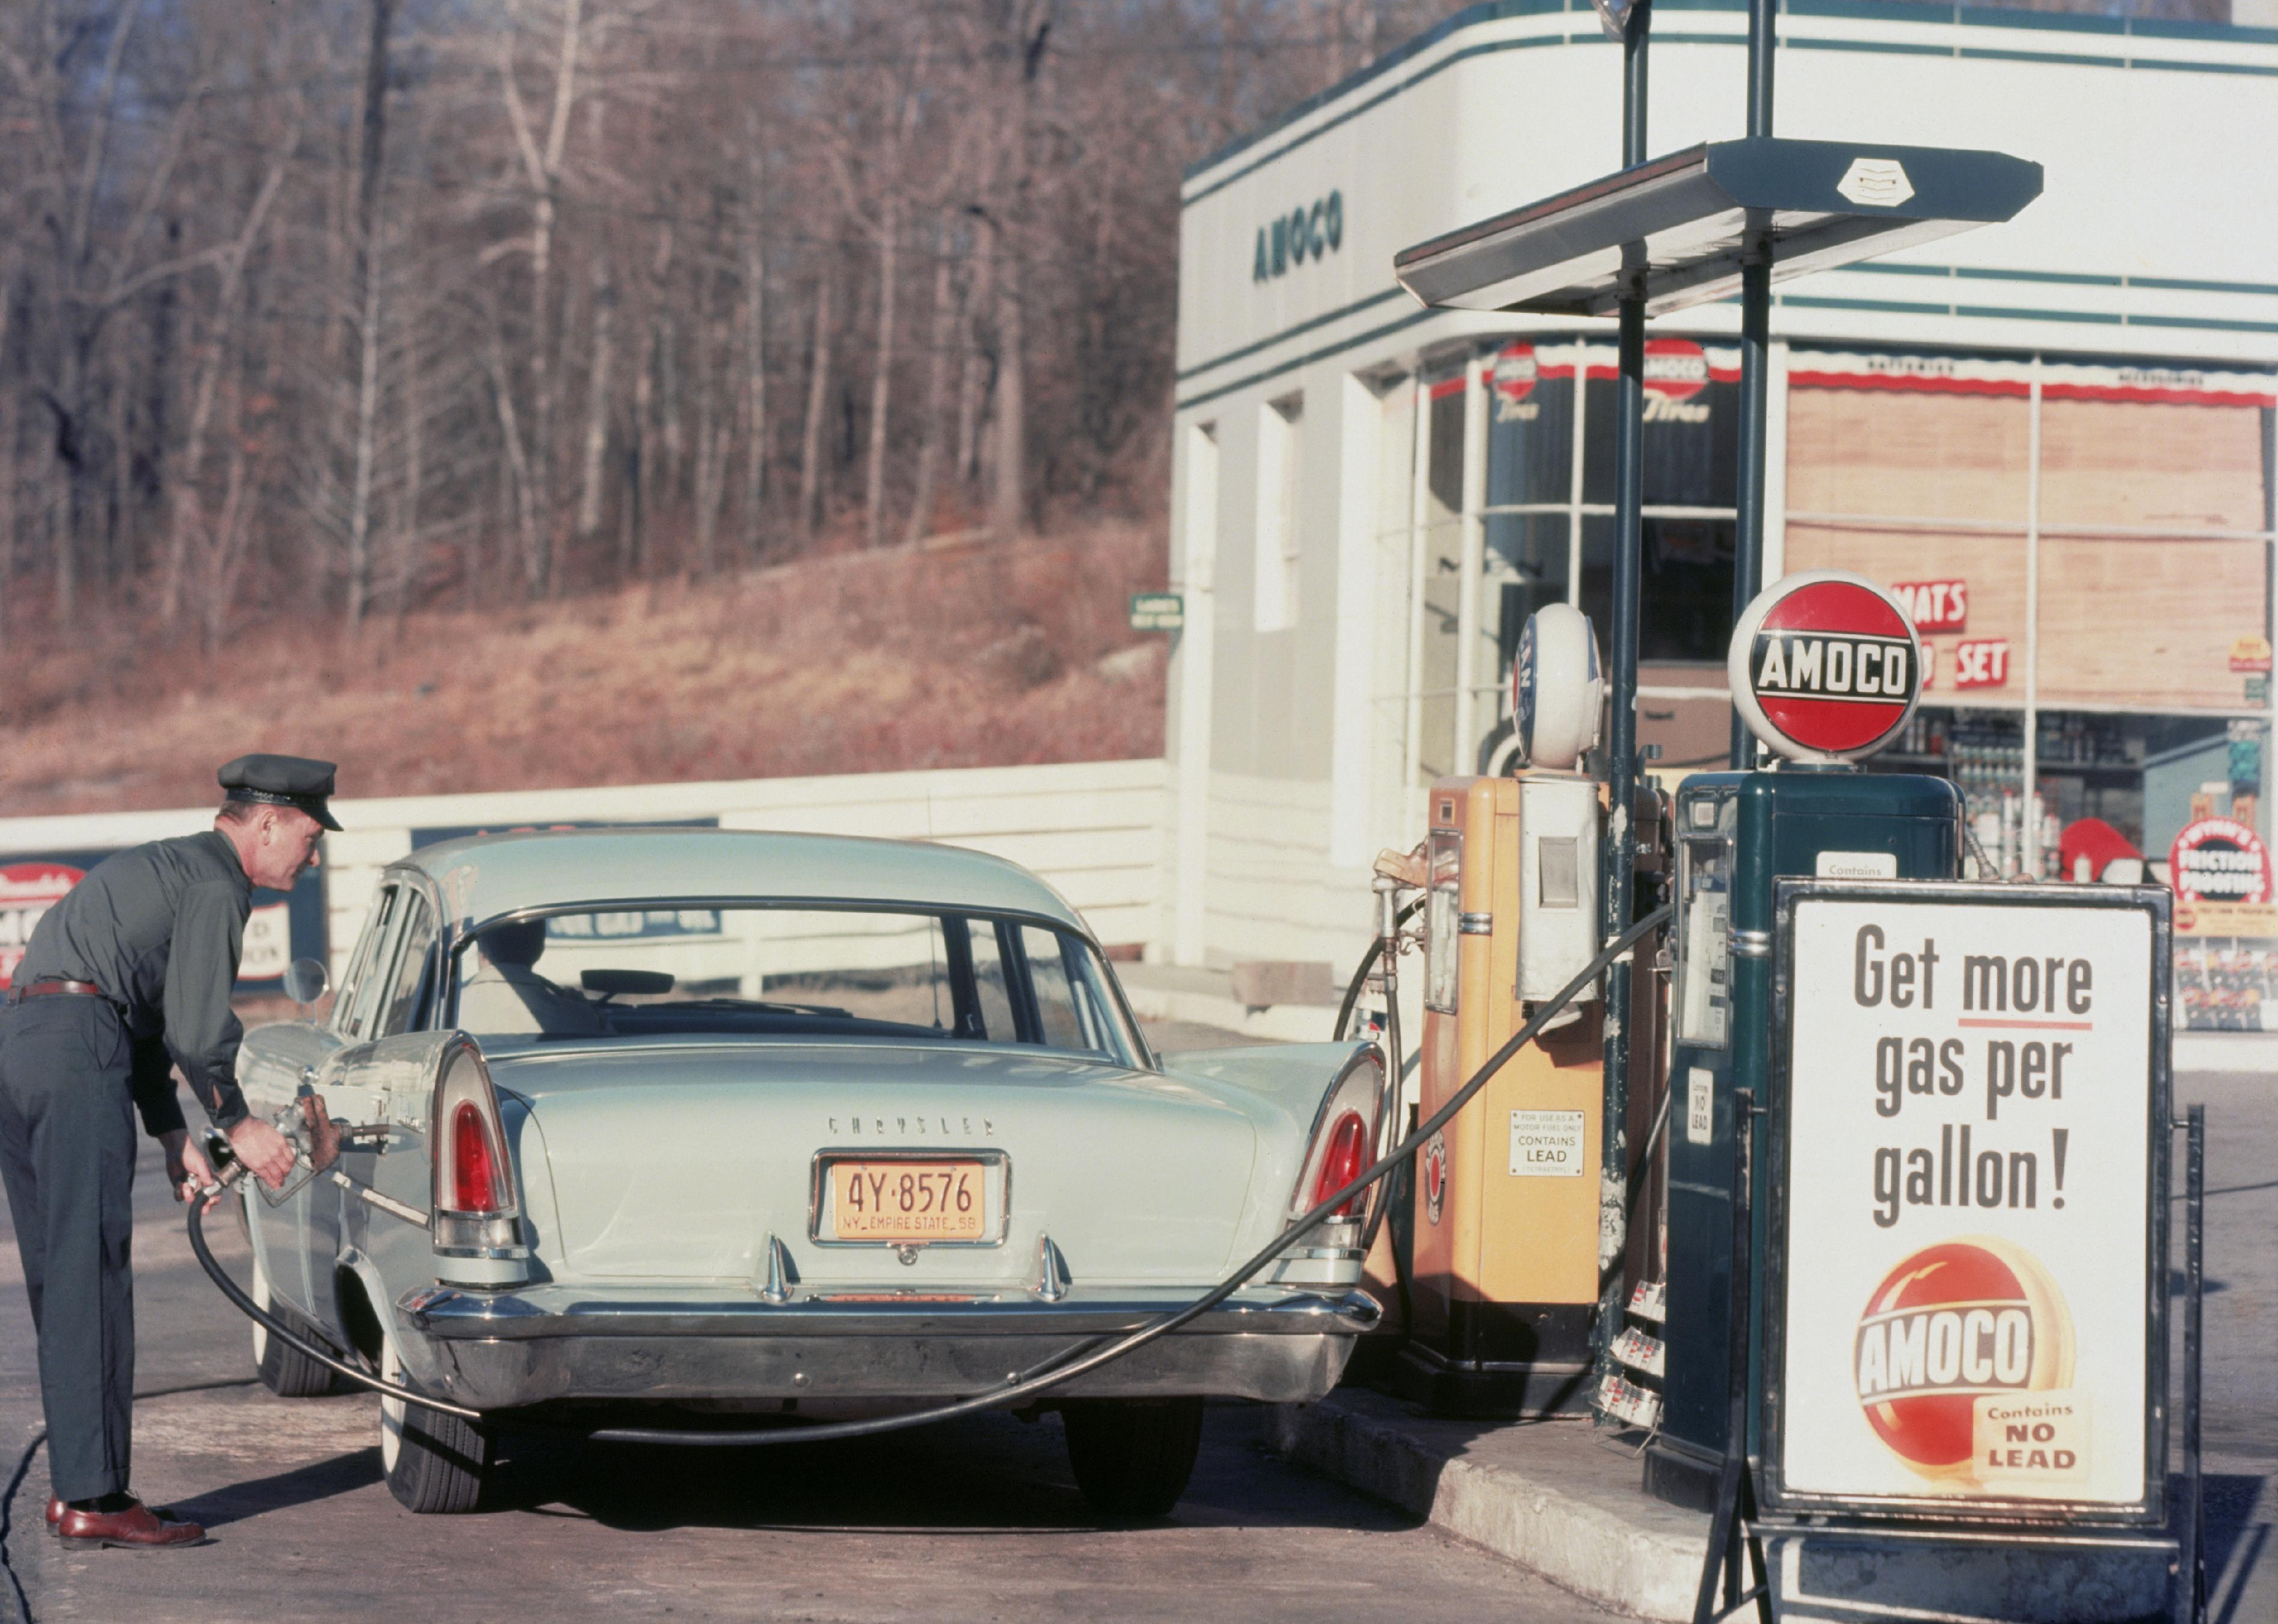 A petrol pump attendant filling up a Chrysler car at an Amoco station, 1958.